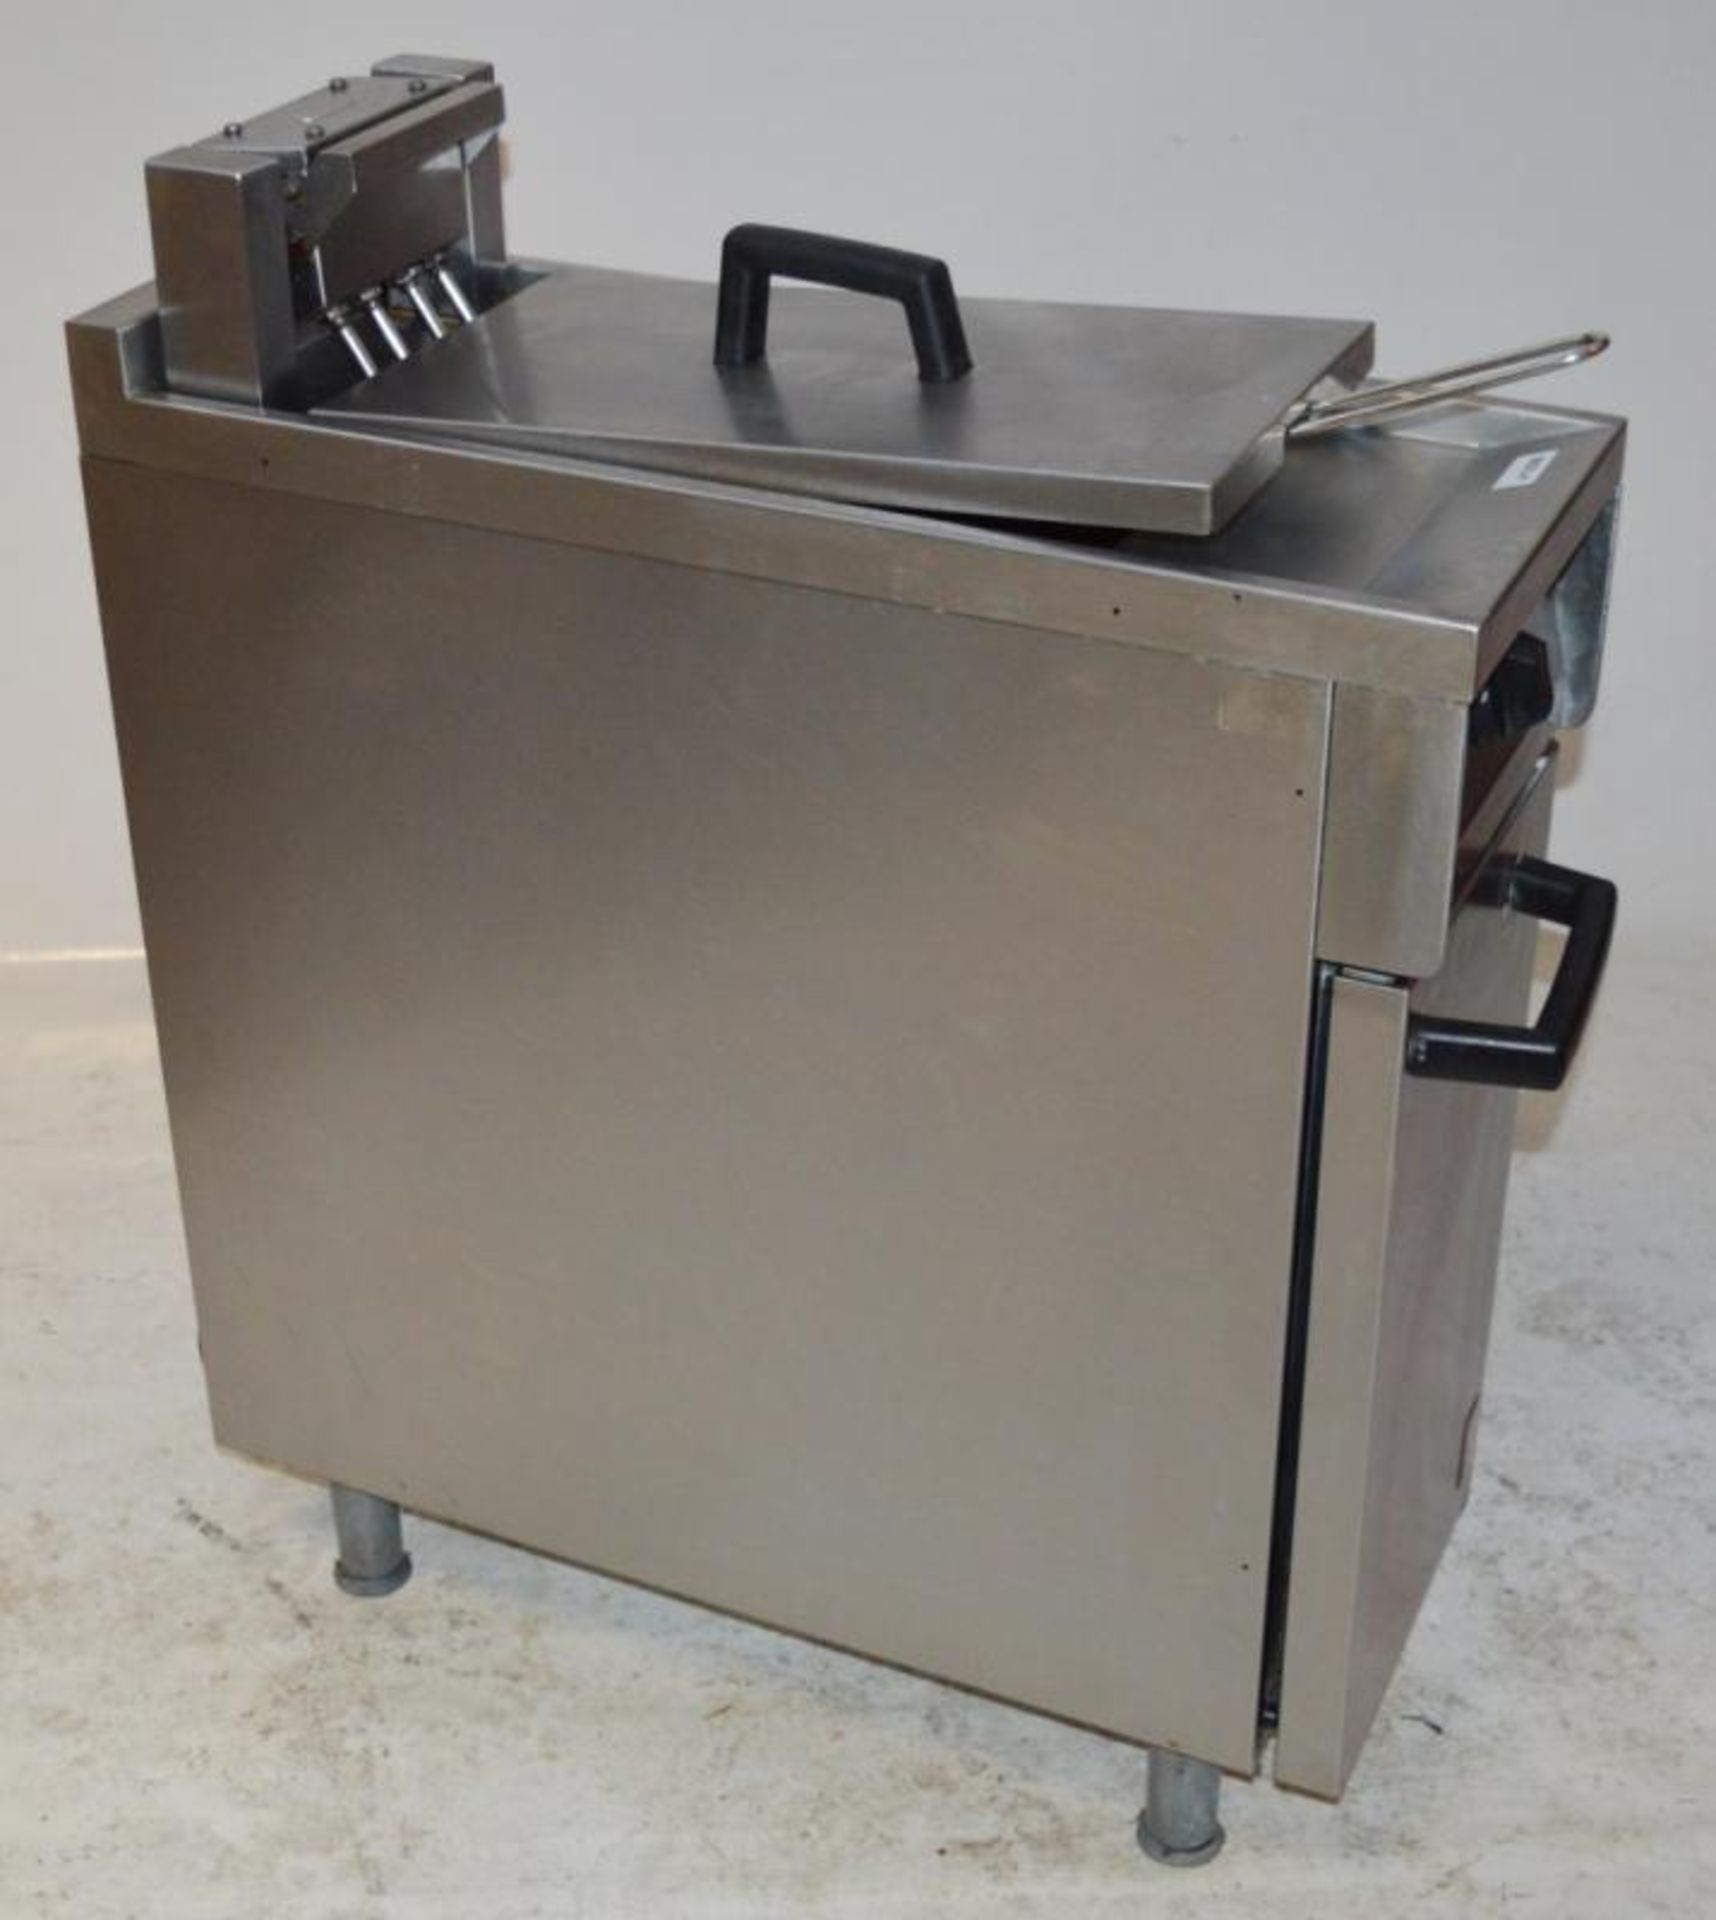 1 x Falcon Dominator E1830 Electric 3 Phase Fryer Cooker - Stainless Steel - H84 x W30 x D77 cms - C - Image 11 of 13